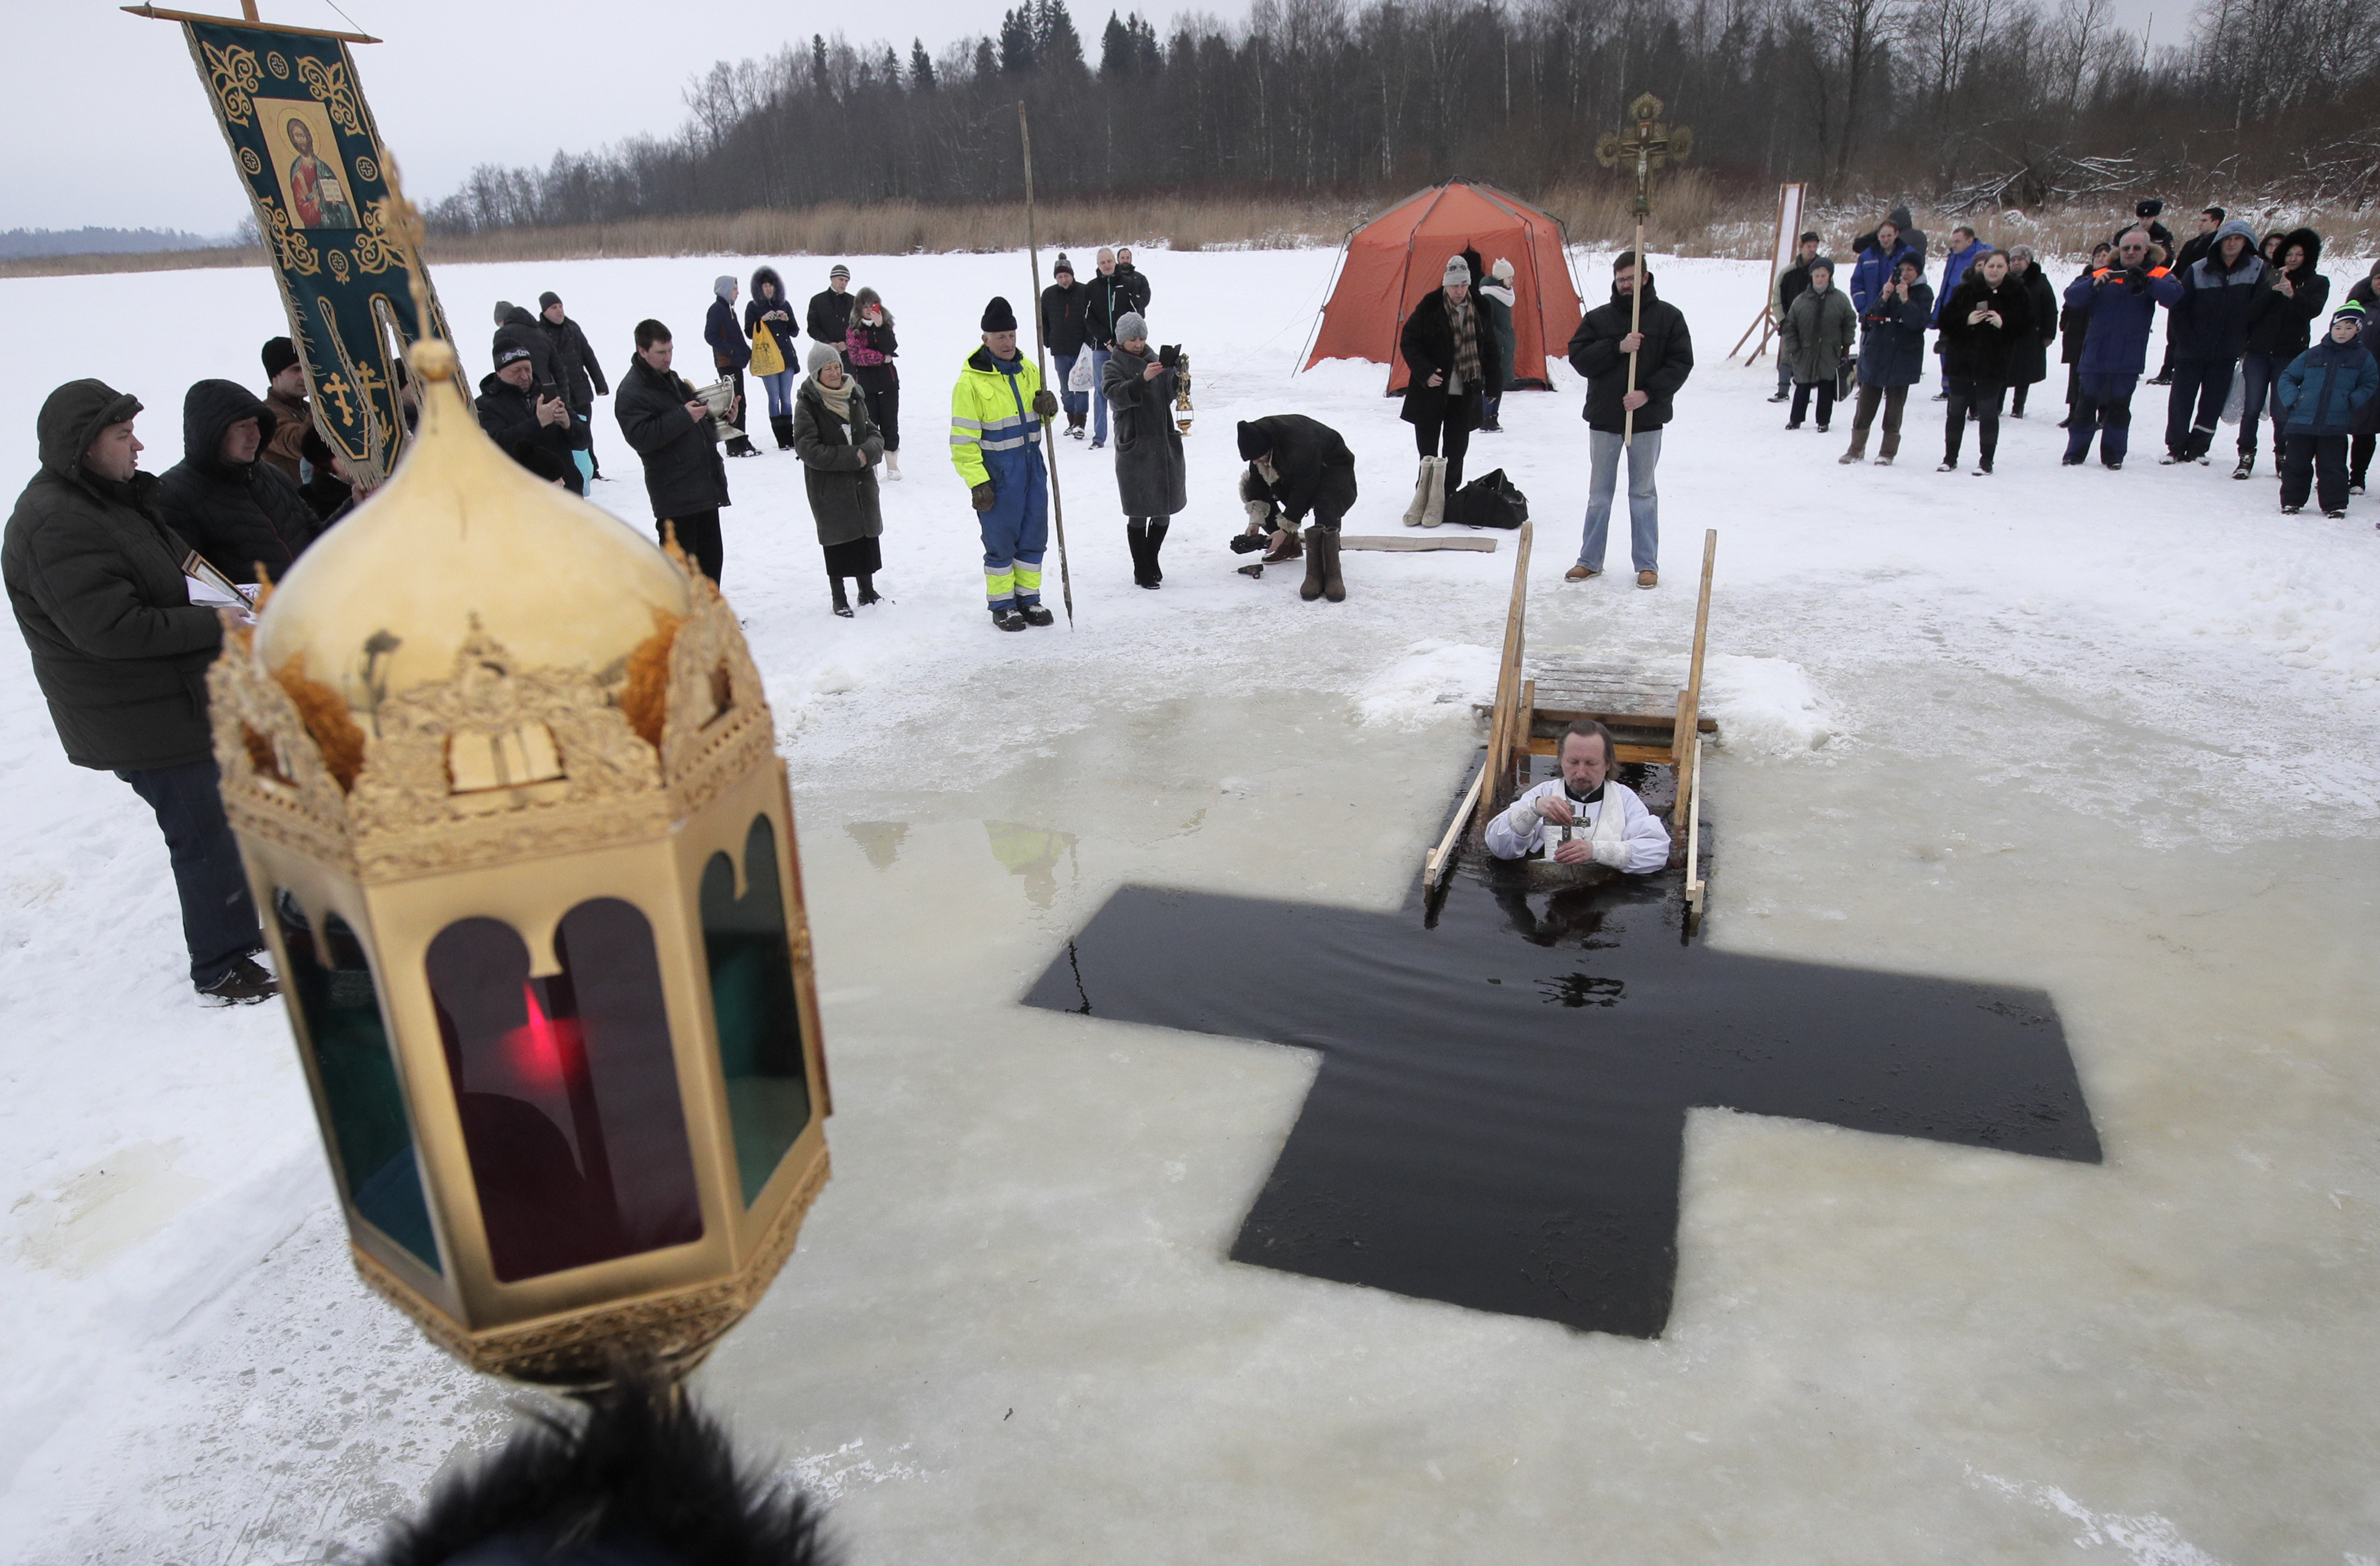 A Russian Orthodox priest conducts a service in the icy water on Epiphany at a hole in the form of Orthodox Cross at a lake in Orlino village, 70 kilometers (43 miles) south of St.Petersburg, Russia, Friday, Jan. 19, 2018. Thousands of Russian Orthodox Church followers plunged into icy rivers and ponds across the country to mark Epiphany, cleansing themselves with water deemed holy for the day. (AP Photo/Dmitri Lovetsky)